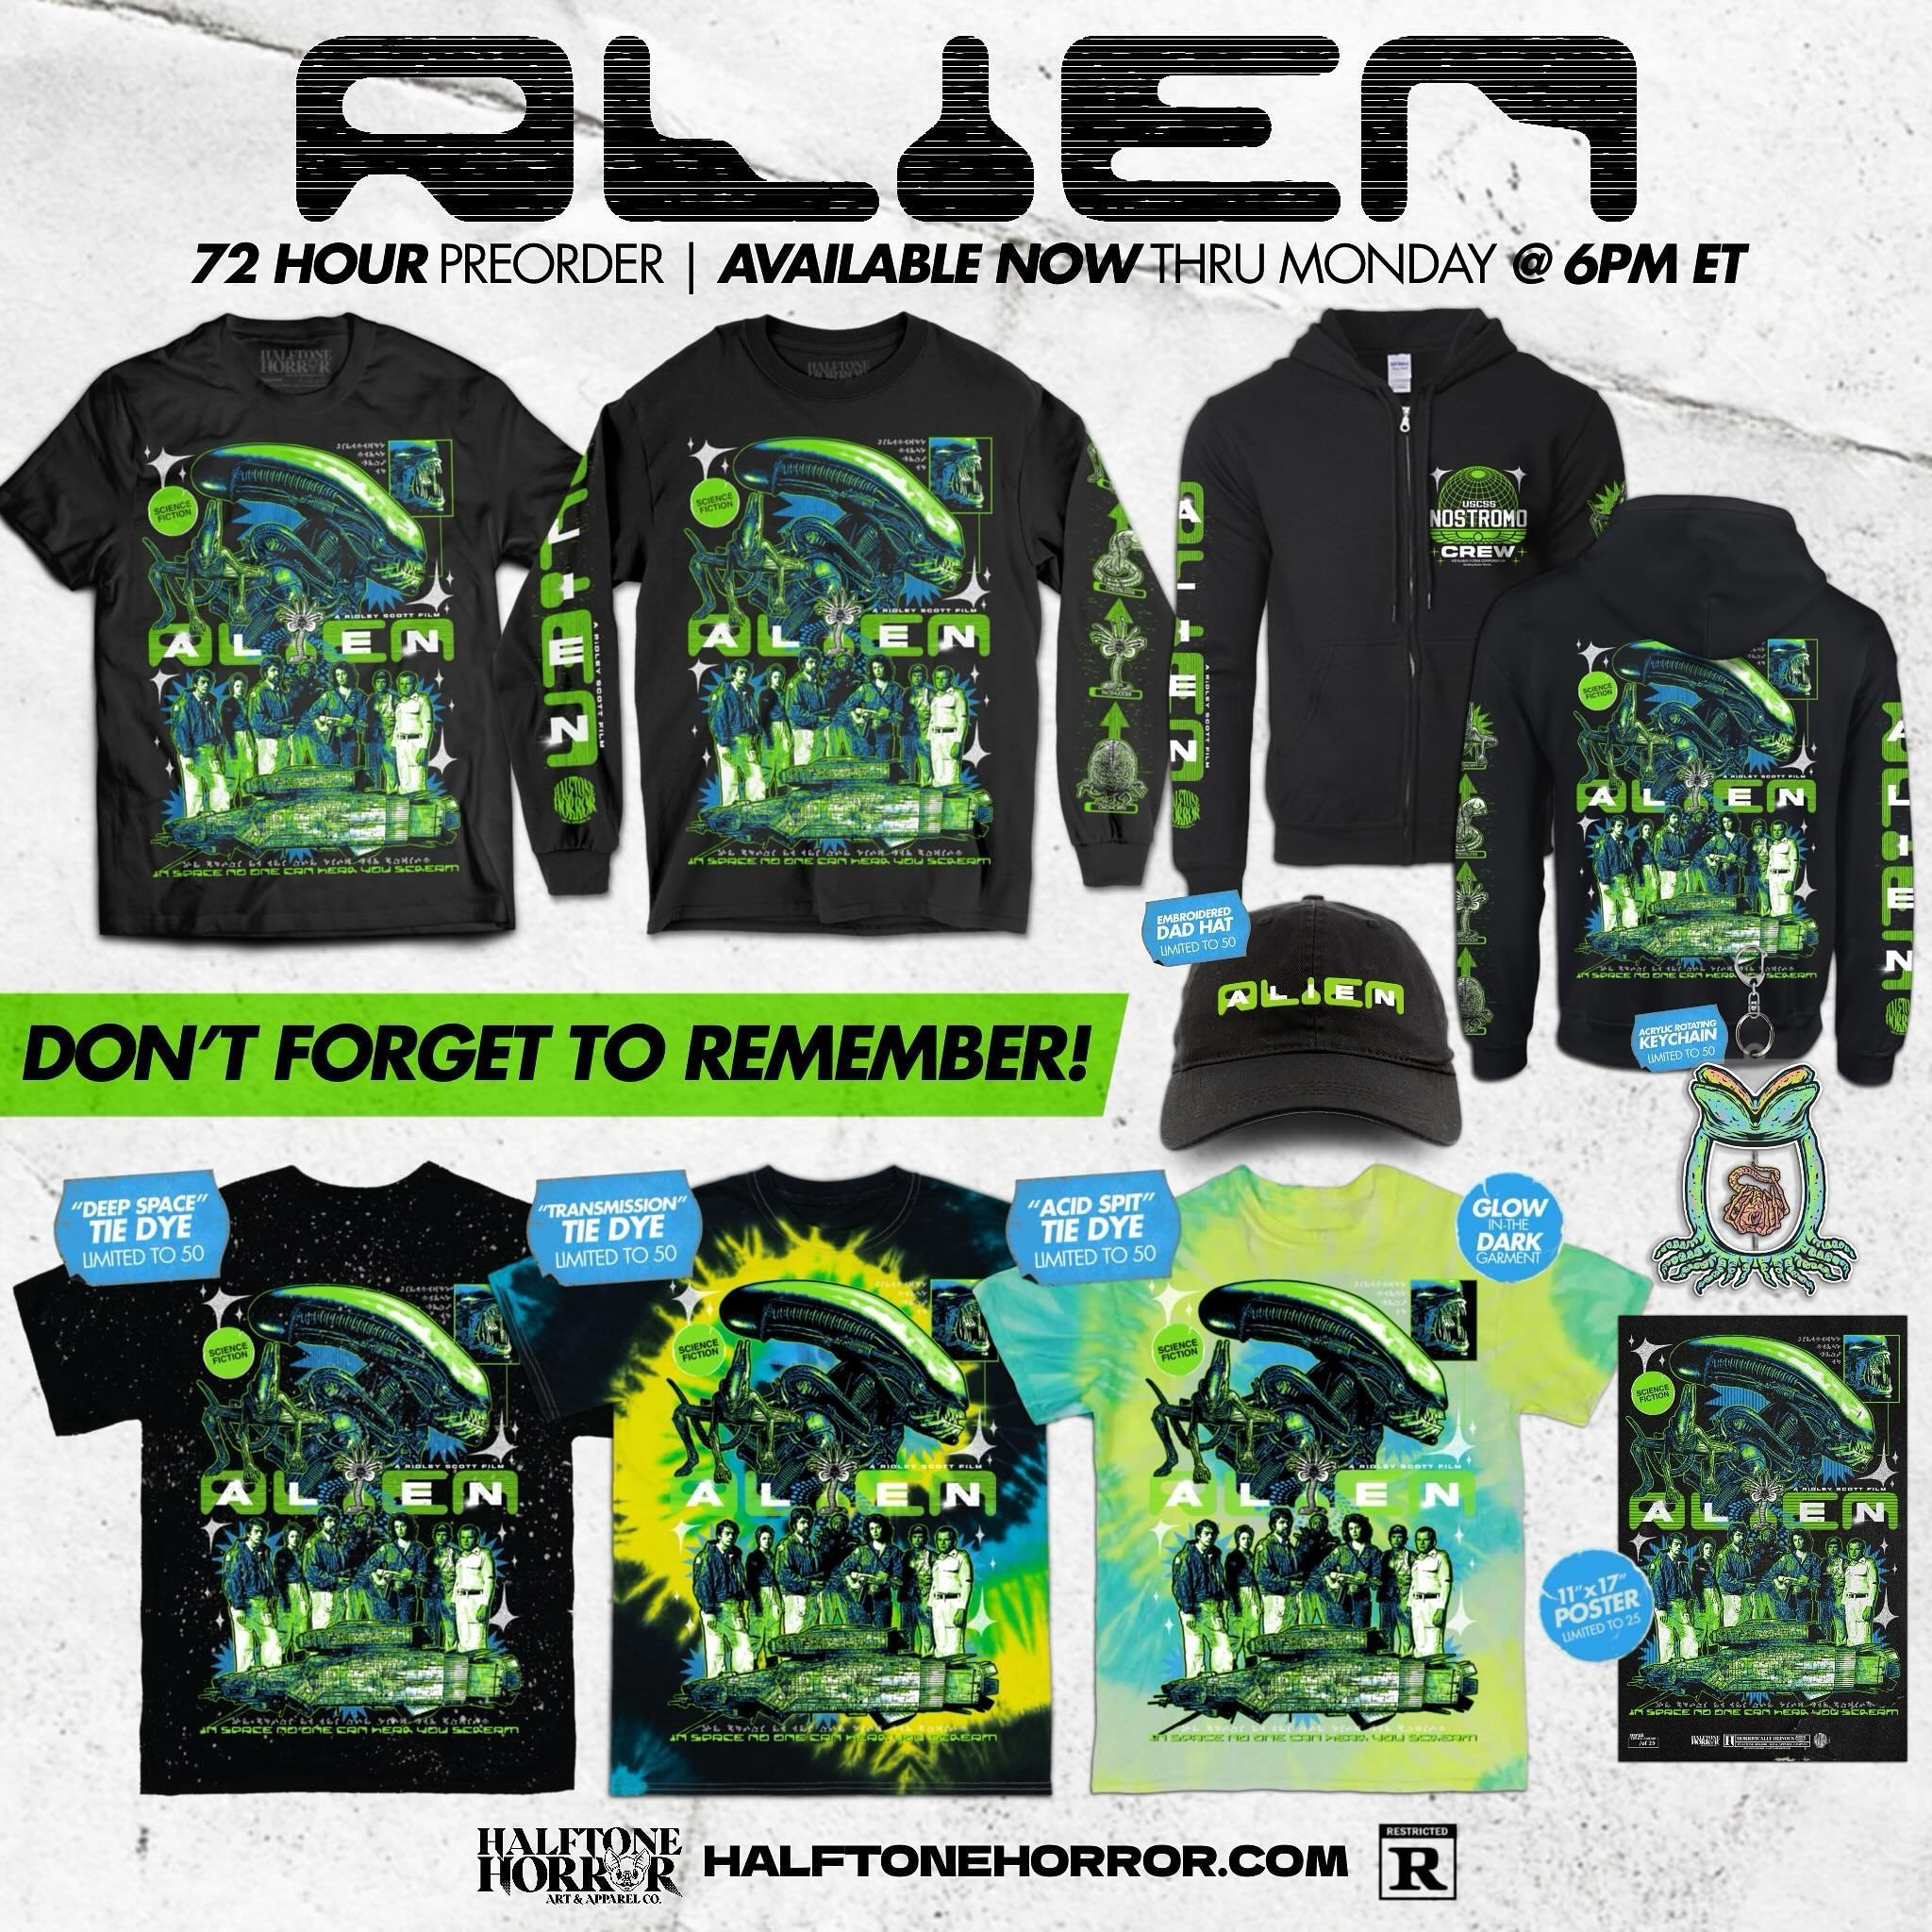 AVAILABLE NOW 👽
.
Happy Alien Day! Our new collection is up for preorder now. Tees, tie dyes, long sleeves, hoodies, NEW rotating keychain and MORE! Available for 72 hours only so don&rsquo;t be a space case and forget. Grab yours today 🛸
.
#alien 